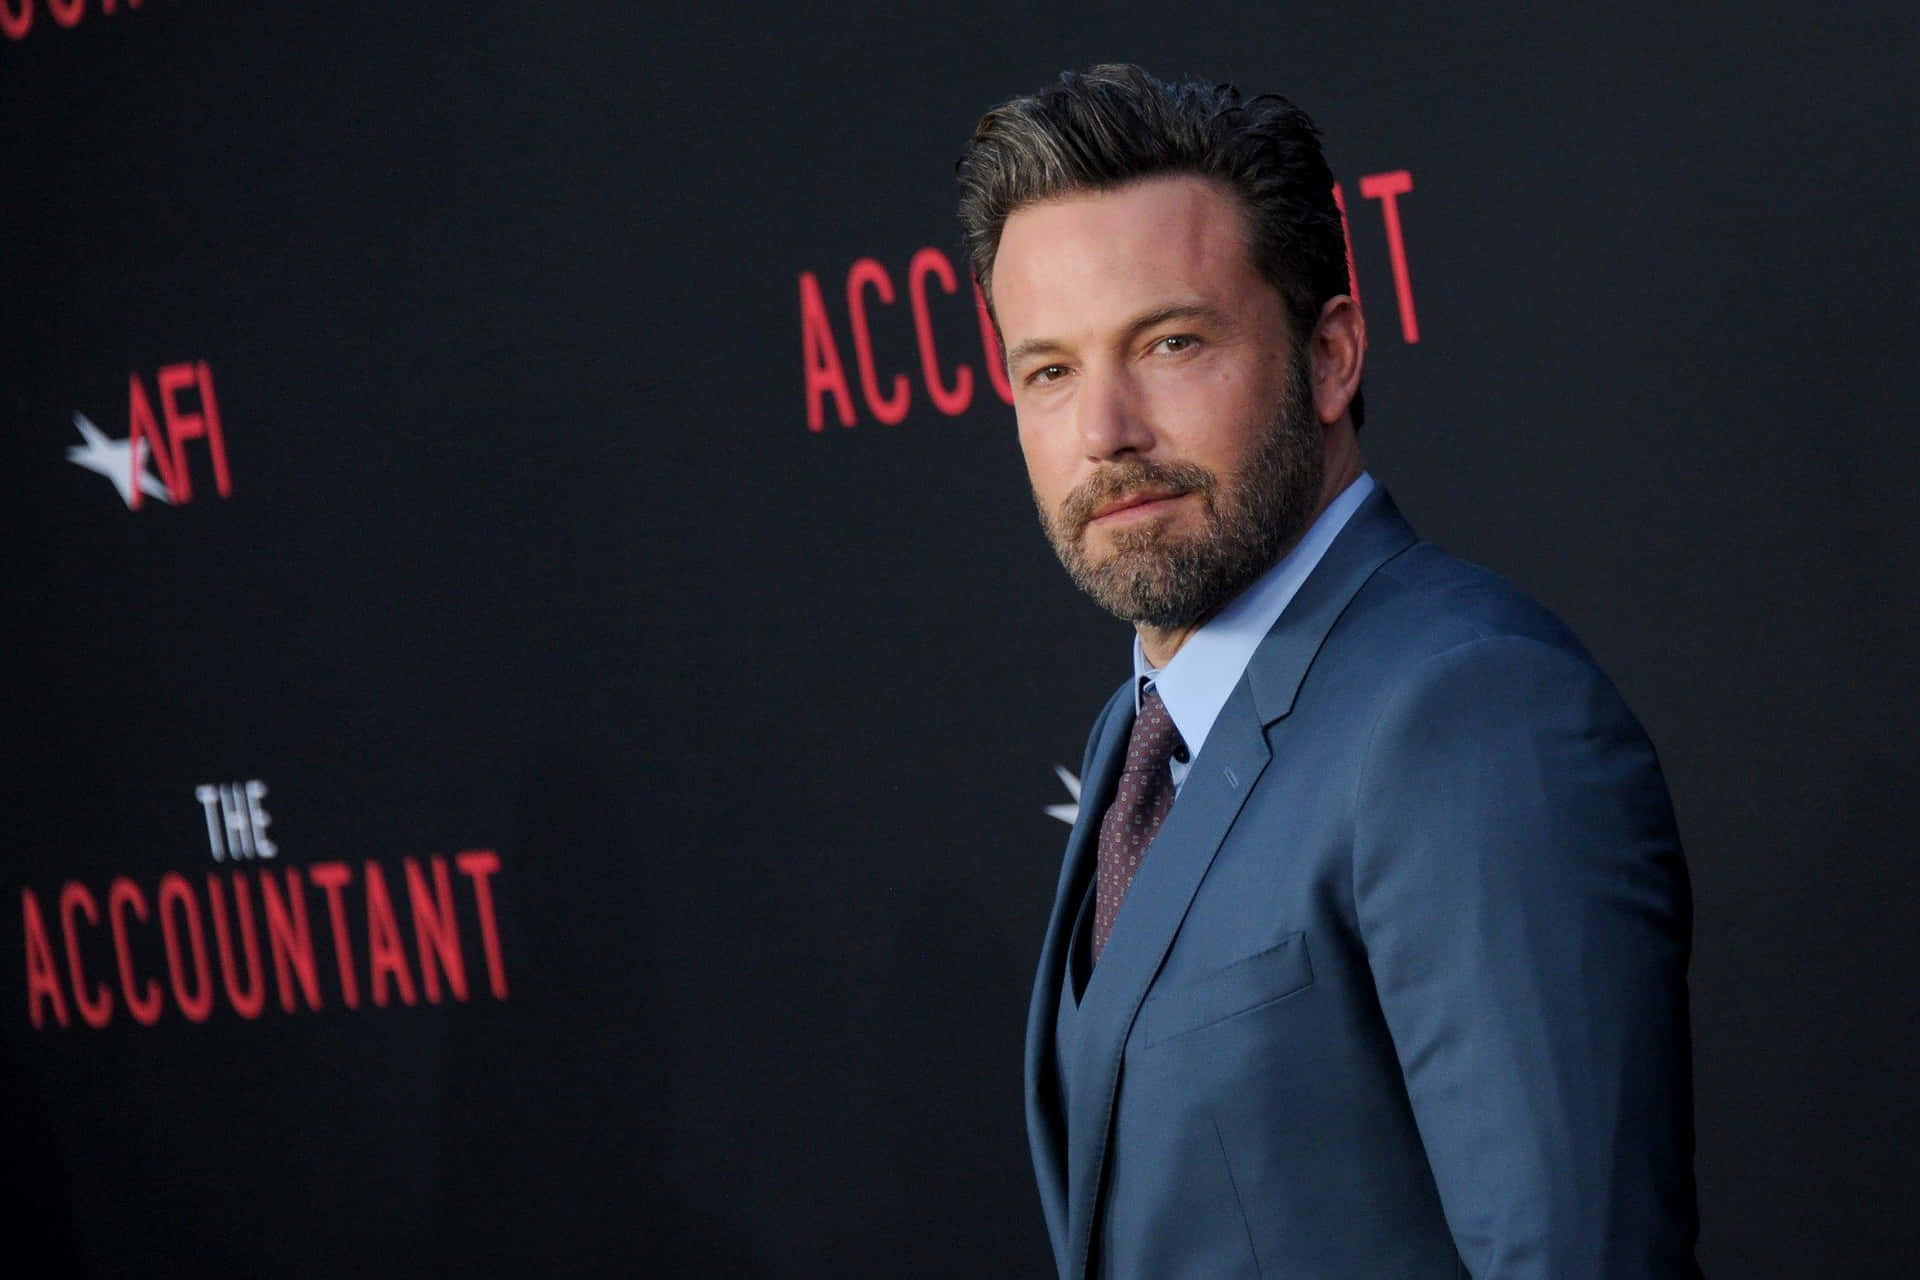 Ben Affleck at the premiere of his latest movie.